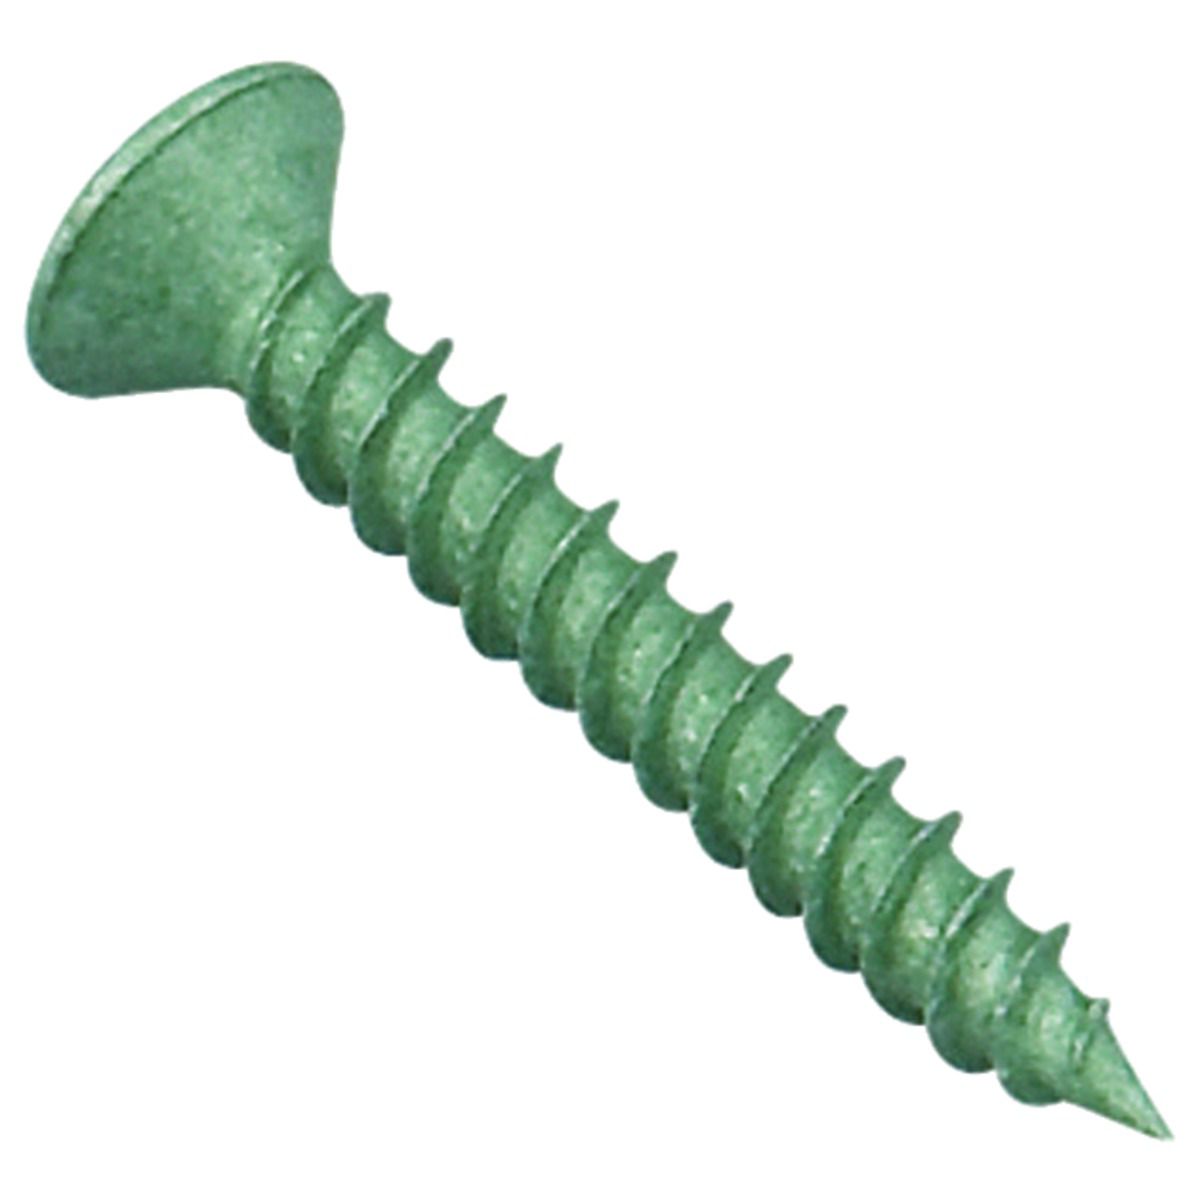 Image of Wickes External Grade Screws - Green No 8 x 38mm Pack of 20